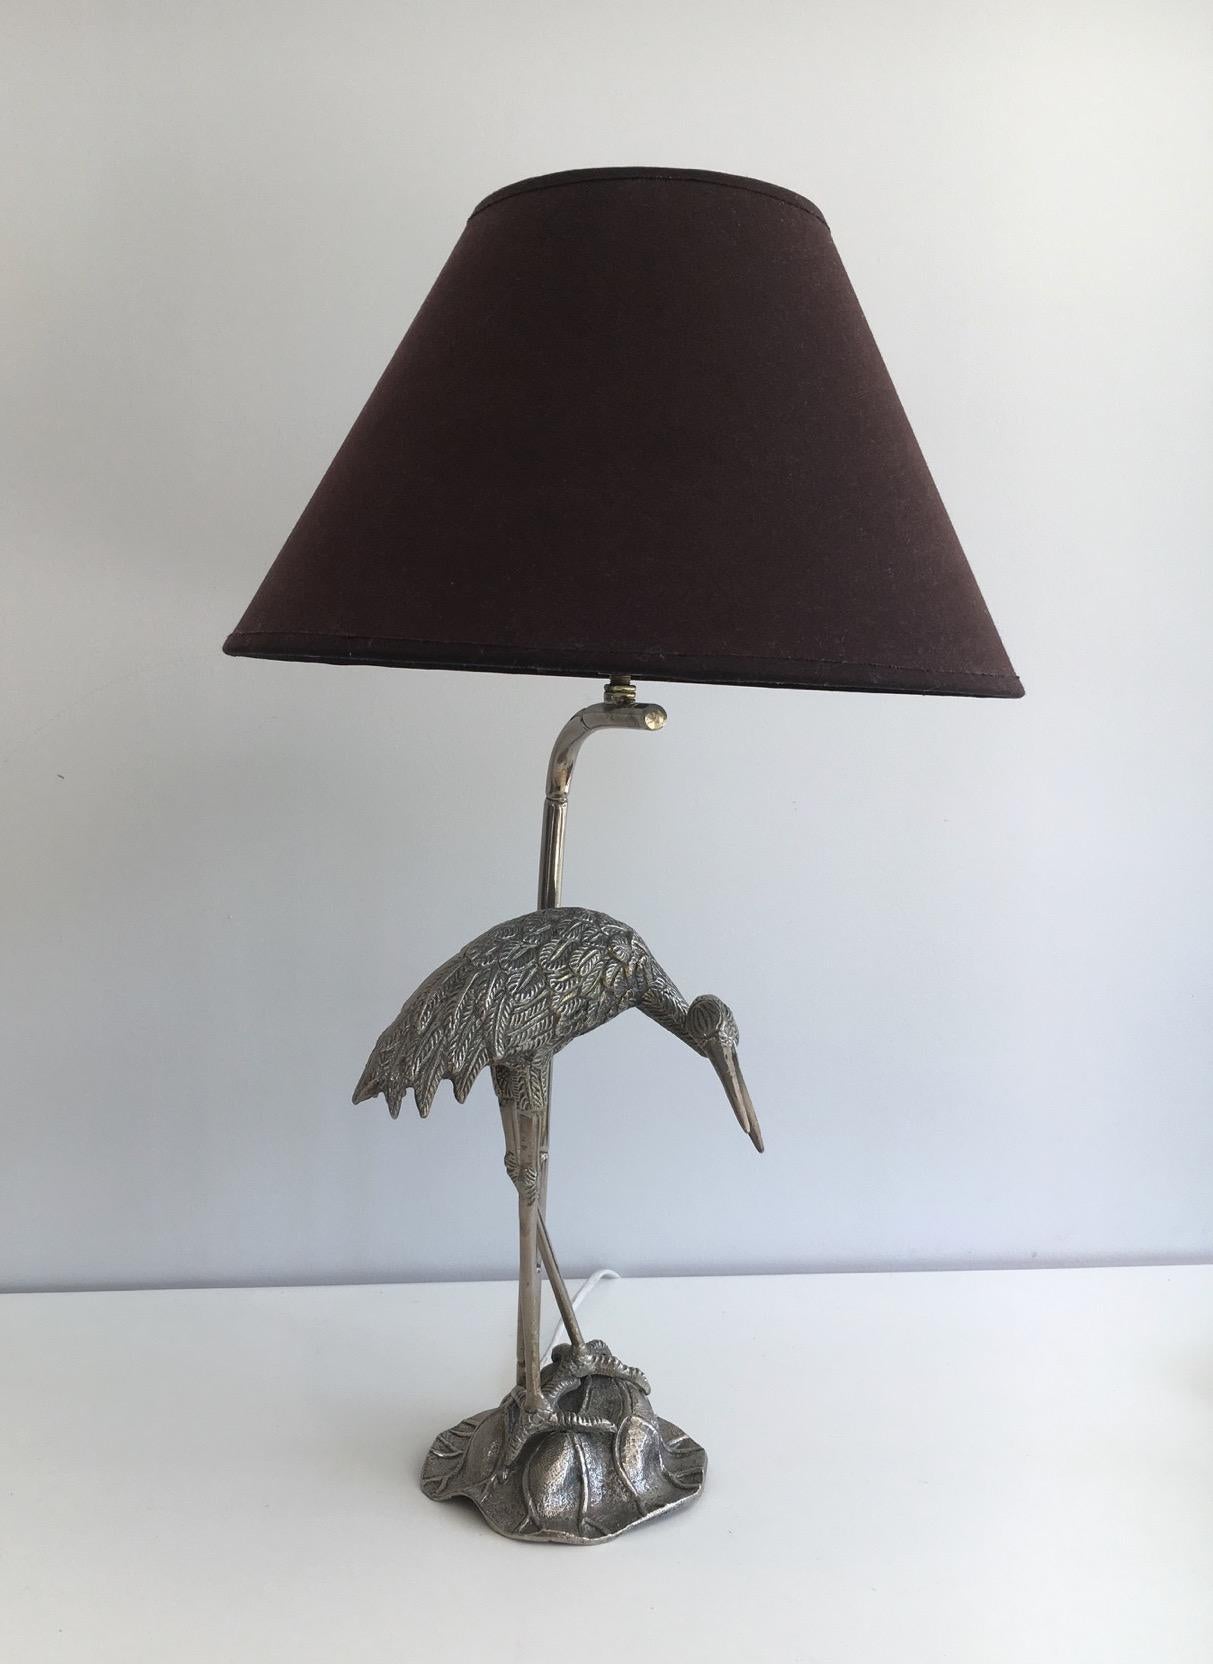 Neoclassical Attributed to Maison Bagués, Silvered Heron Lamp, French, circa 1960